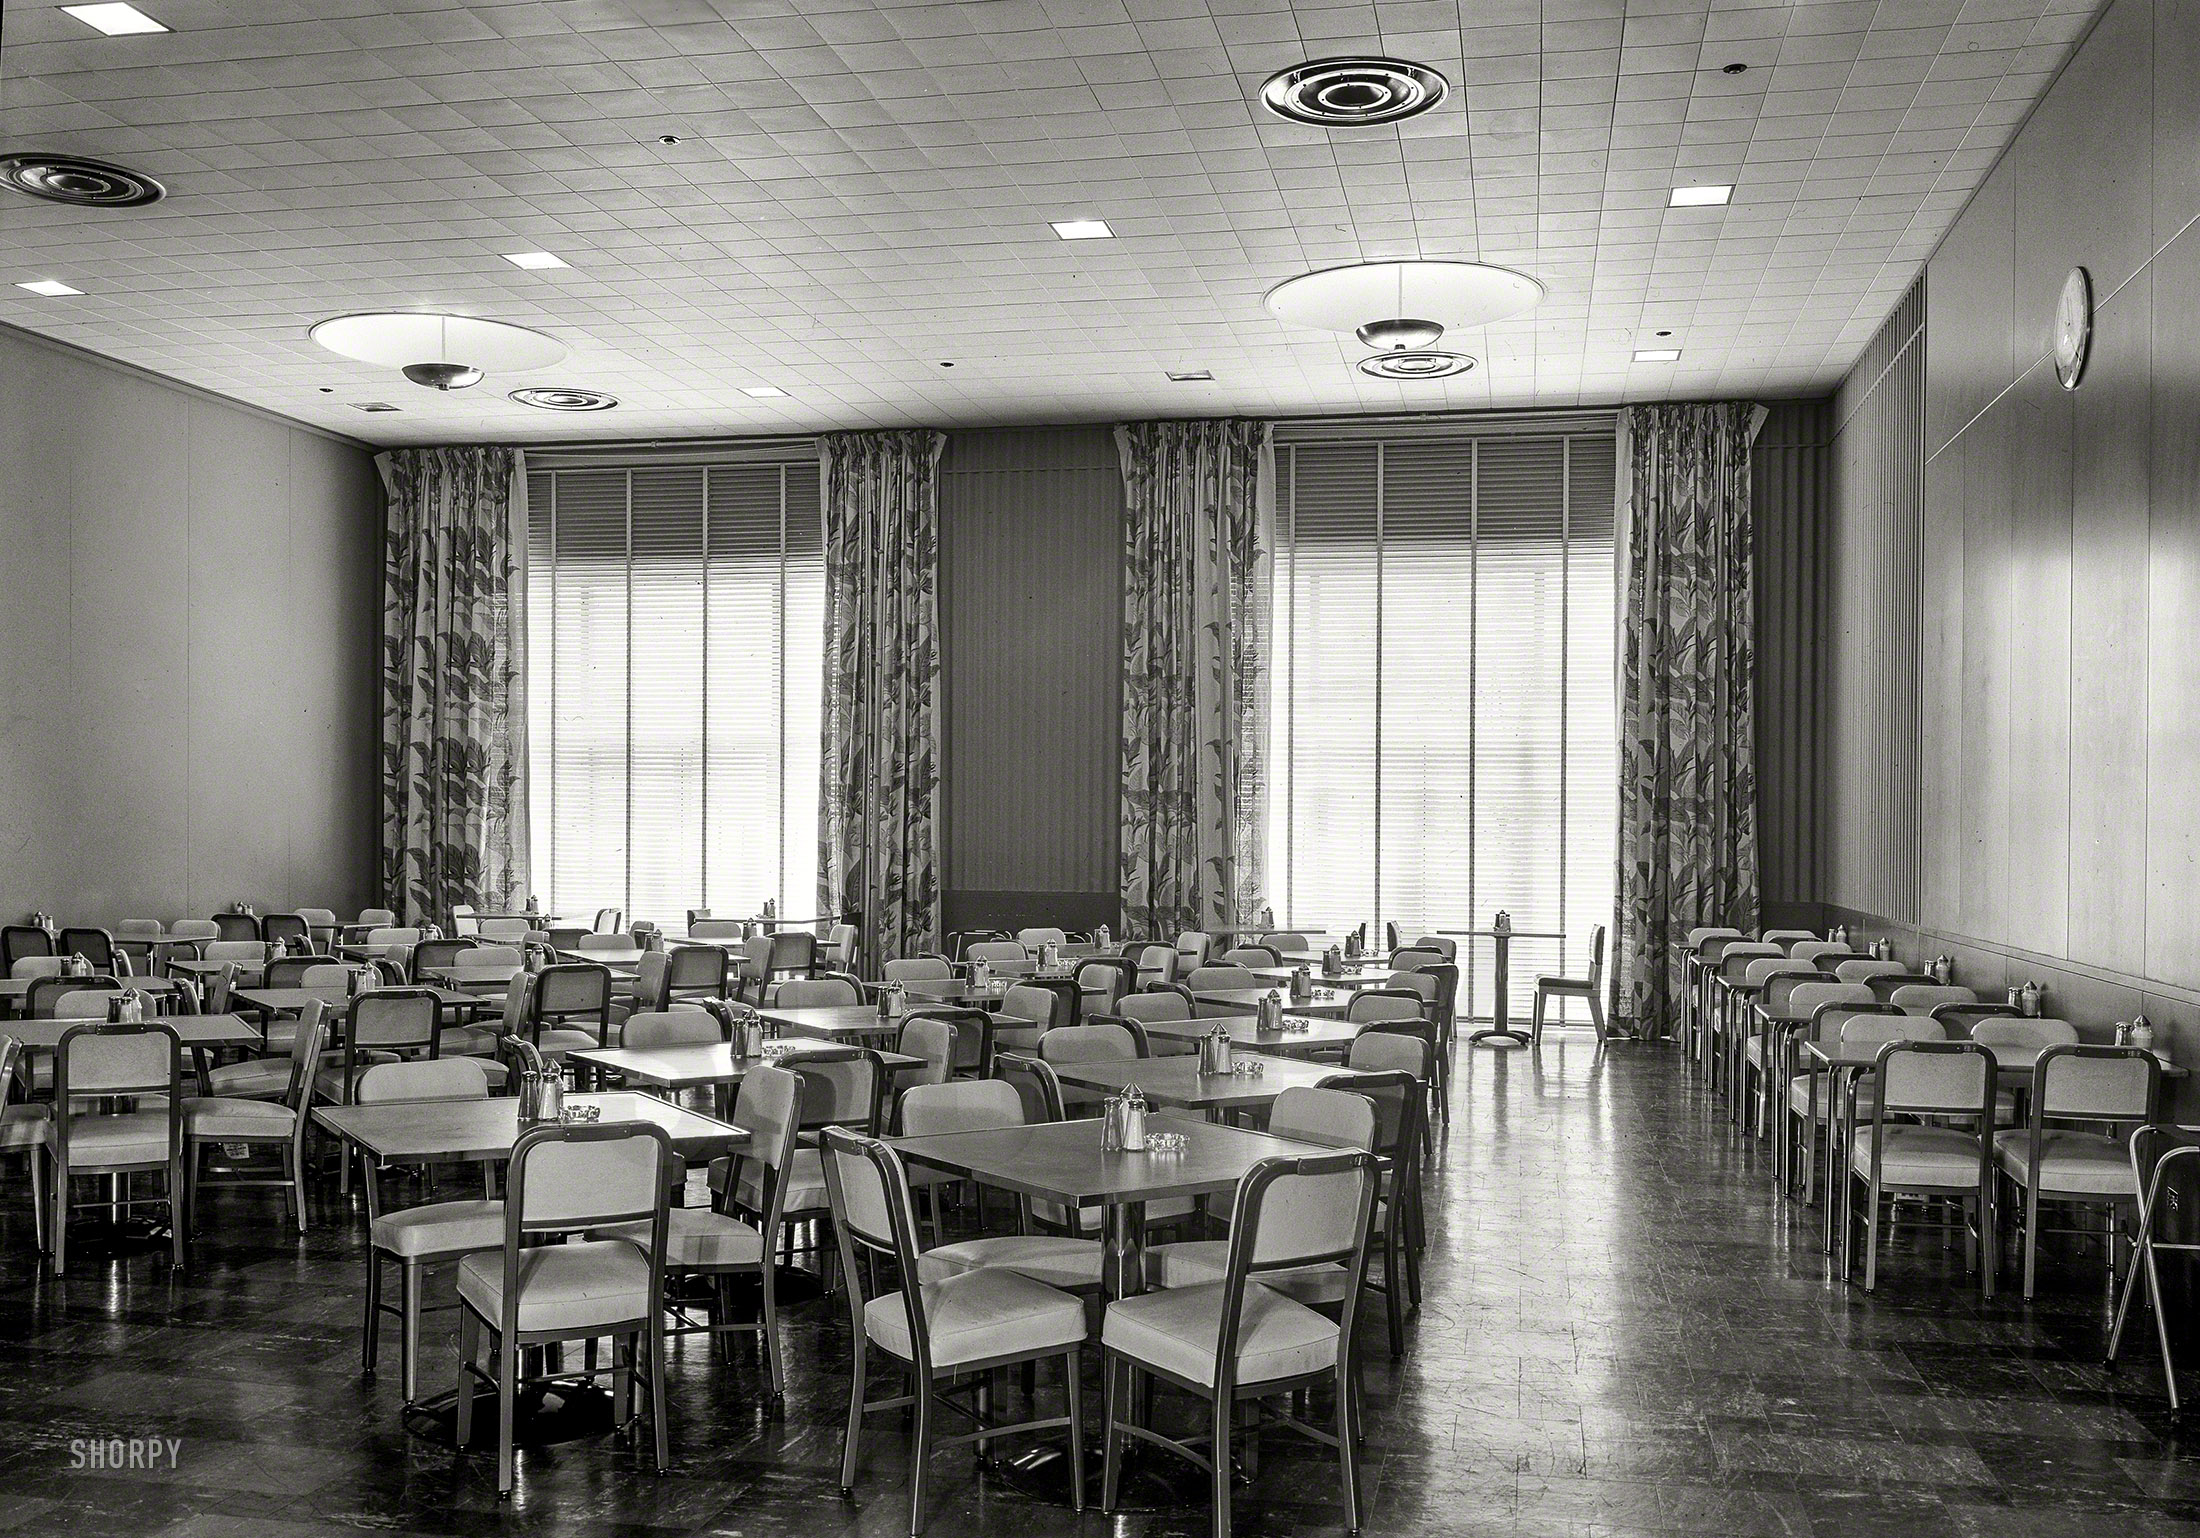 July 6, 1949. "Johns-Manville Research Laboratory, Finderne, New Jersey. Cafeteria. Shreve, Lamb & Harmon, architects." Continuing the tour begun here. Large-format acetate negative by Gottscho-Schleisner. View full size.